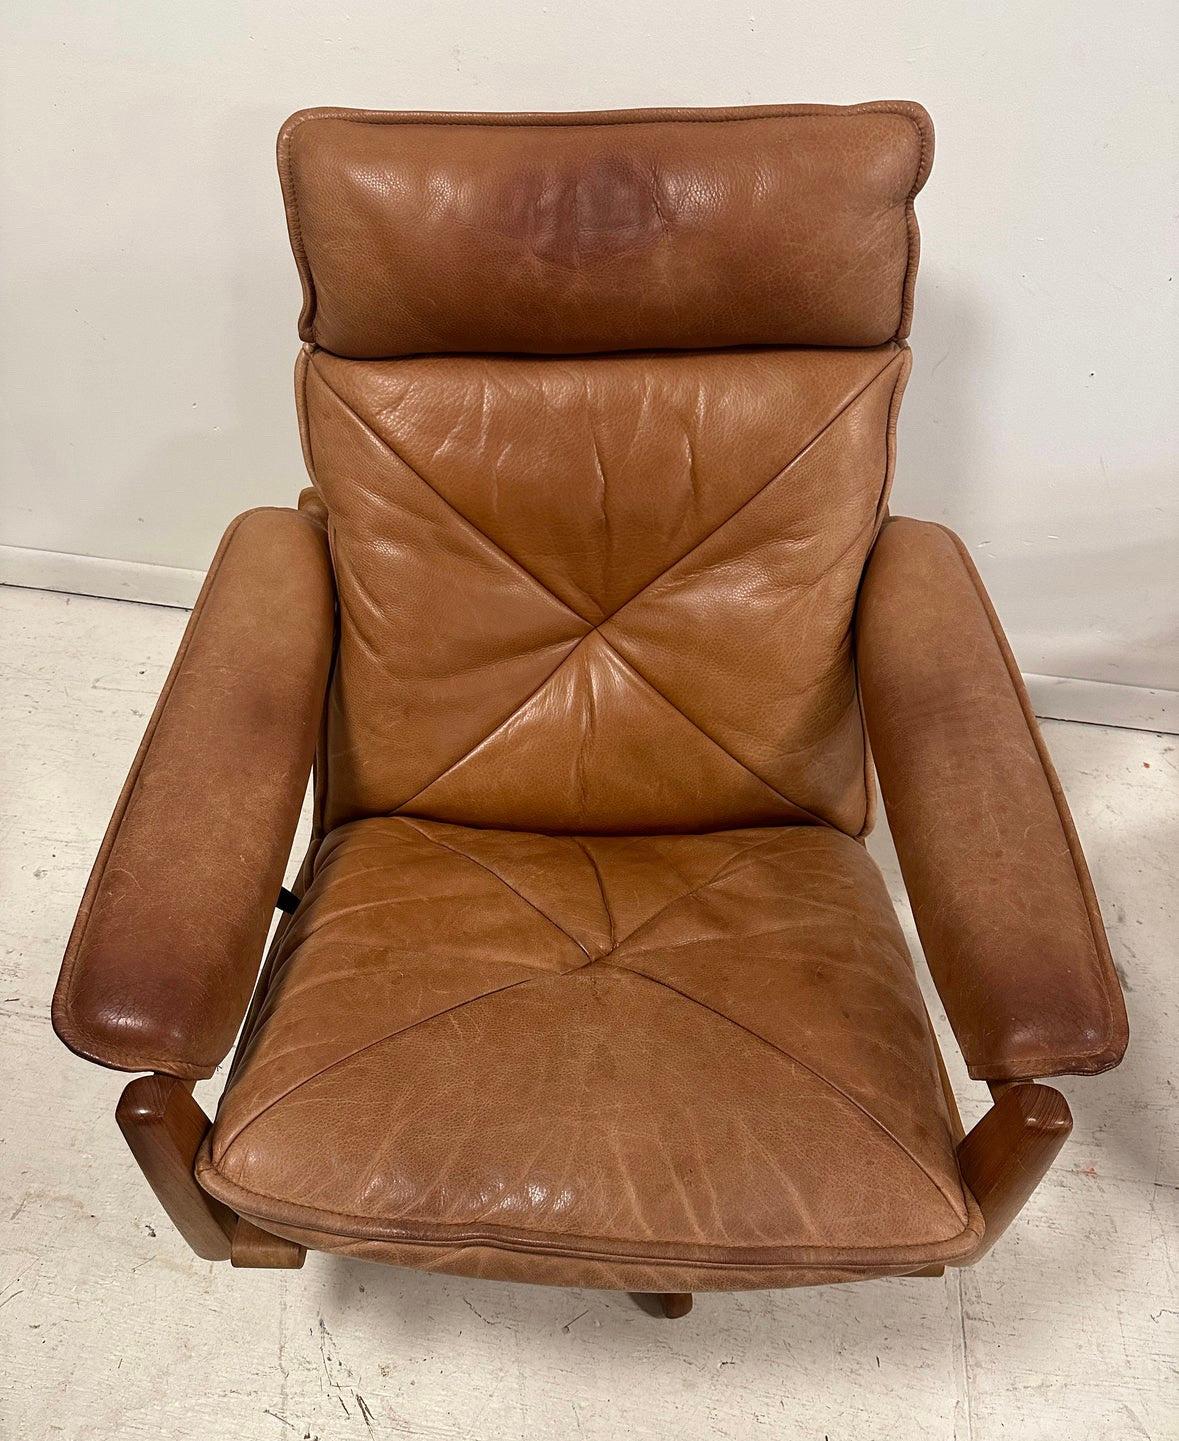 Teak 1970s soda galvino Denmark solid teak recliners with ottomans  For Sale